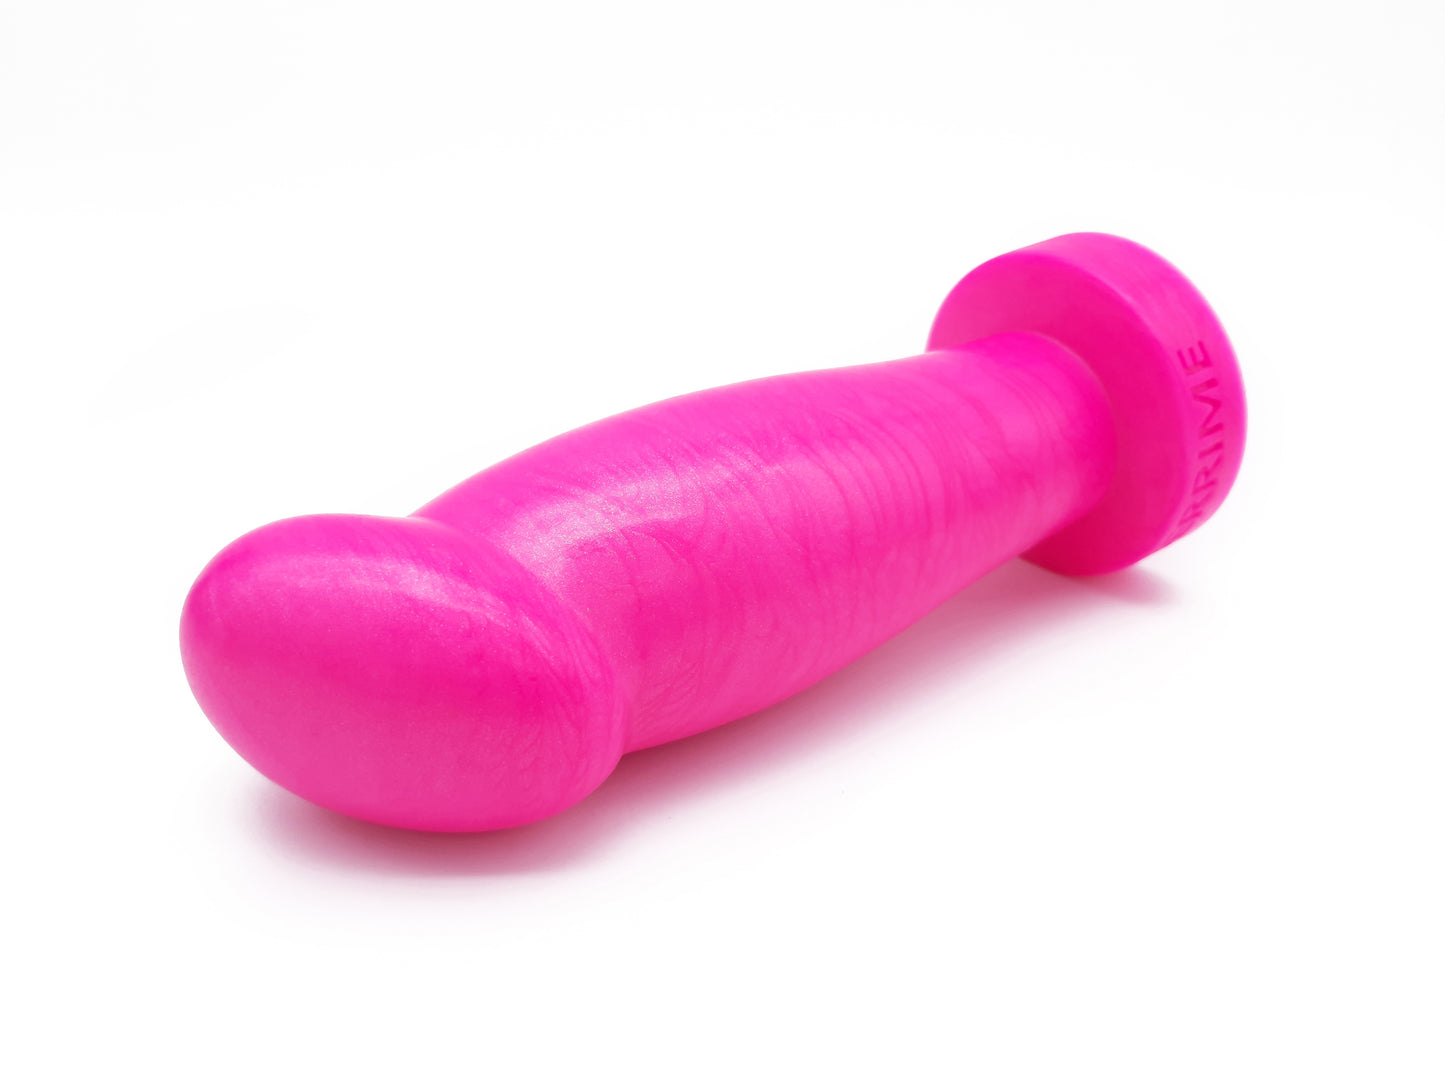 The Elements® #5 Dildo - Small Size